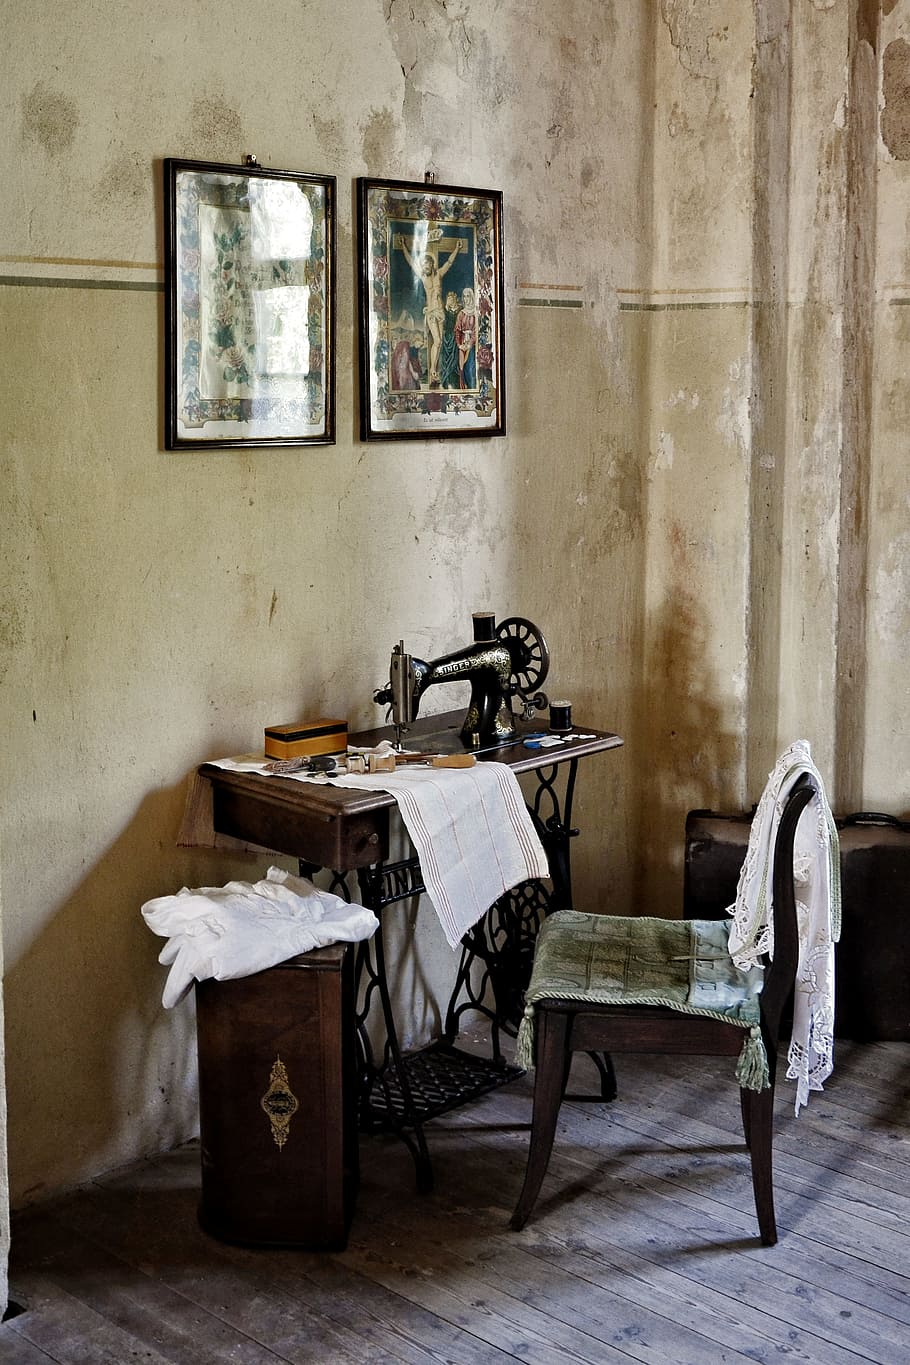 Sewing Machine, Chair, Images, Old, historically, vintage, klöden burg, indoors, absence, old-fashioned